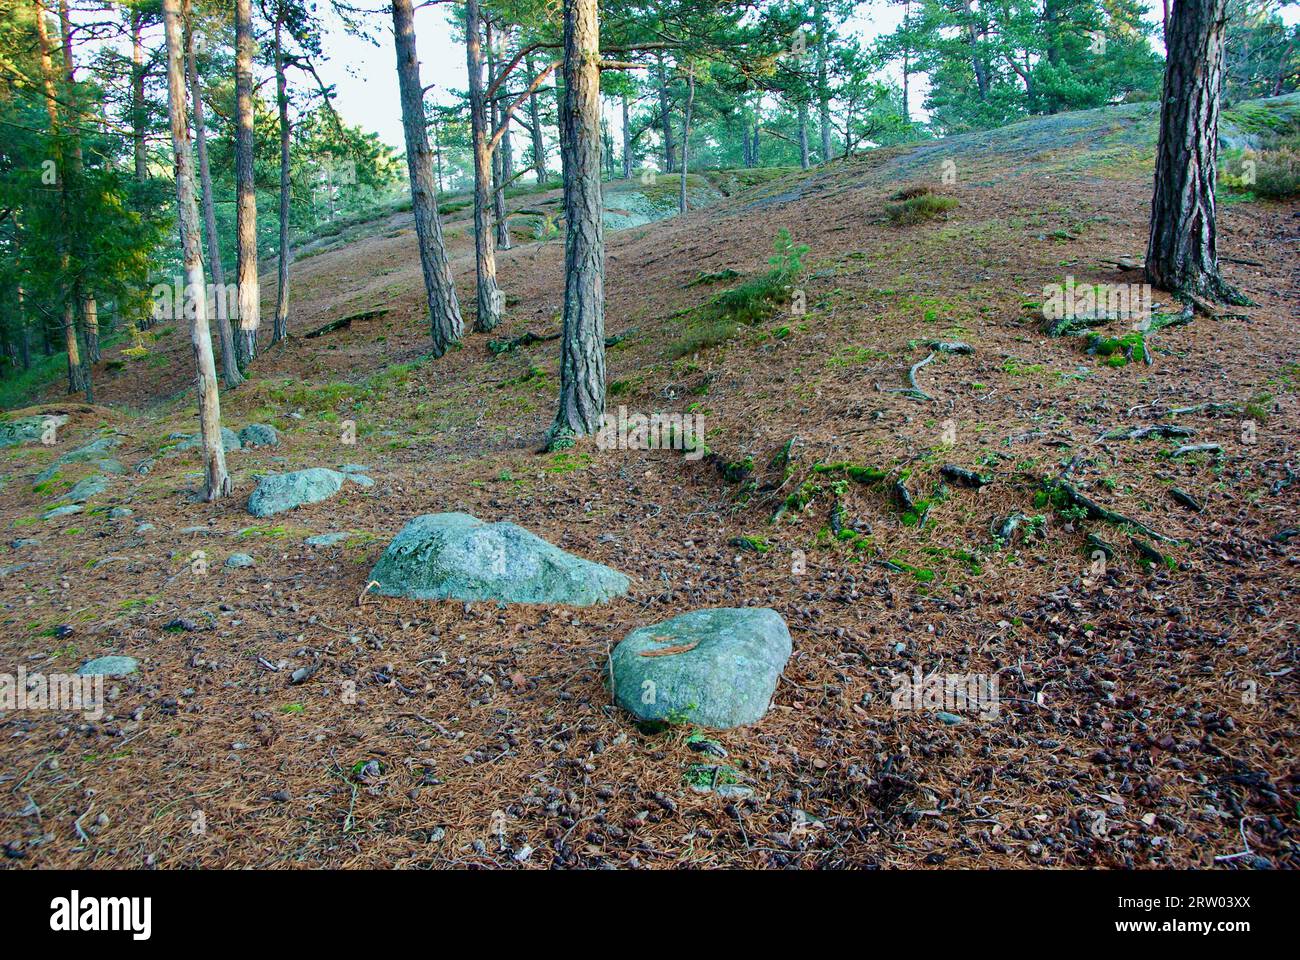 Forest landscape with hilly terrain and pine tree trunks and roots in winter. Stock Photo